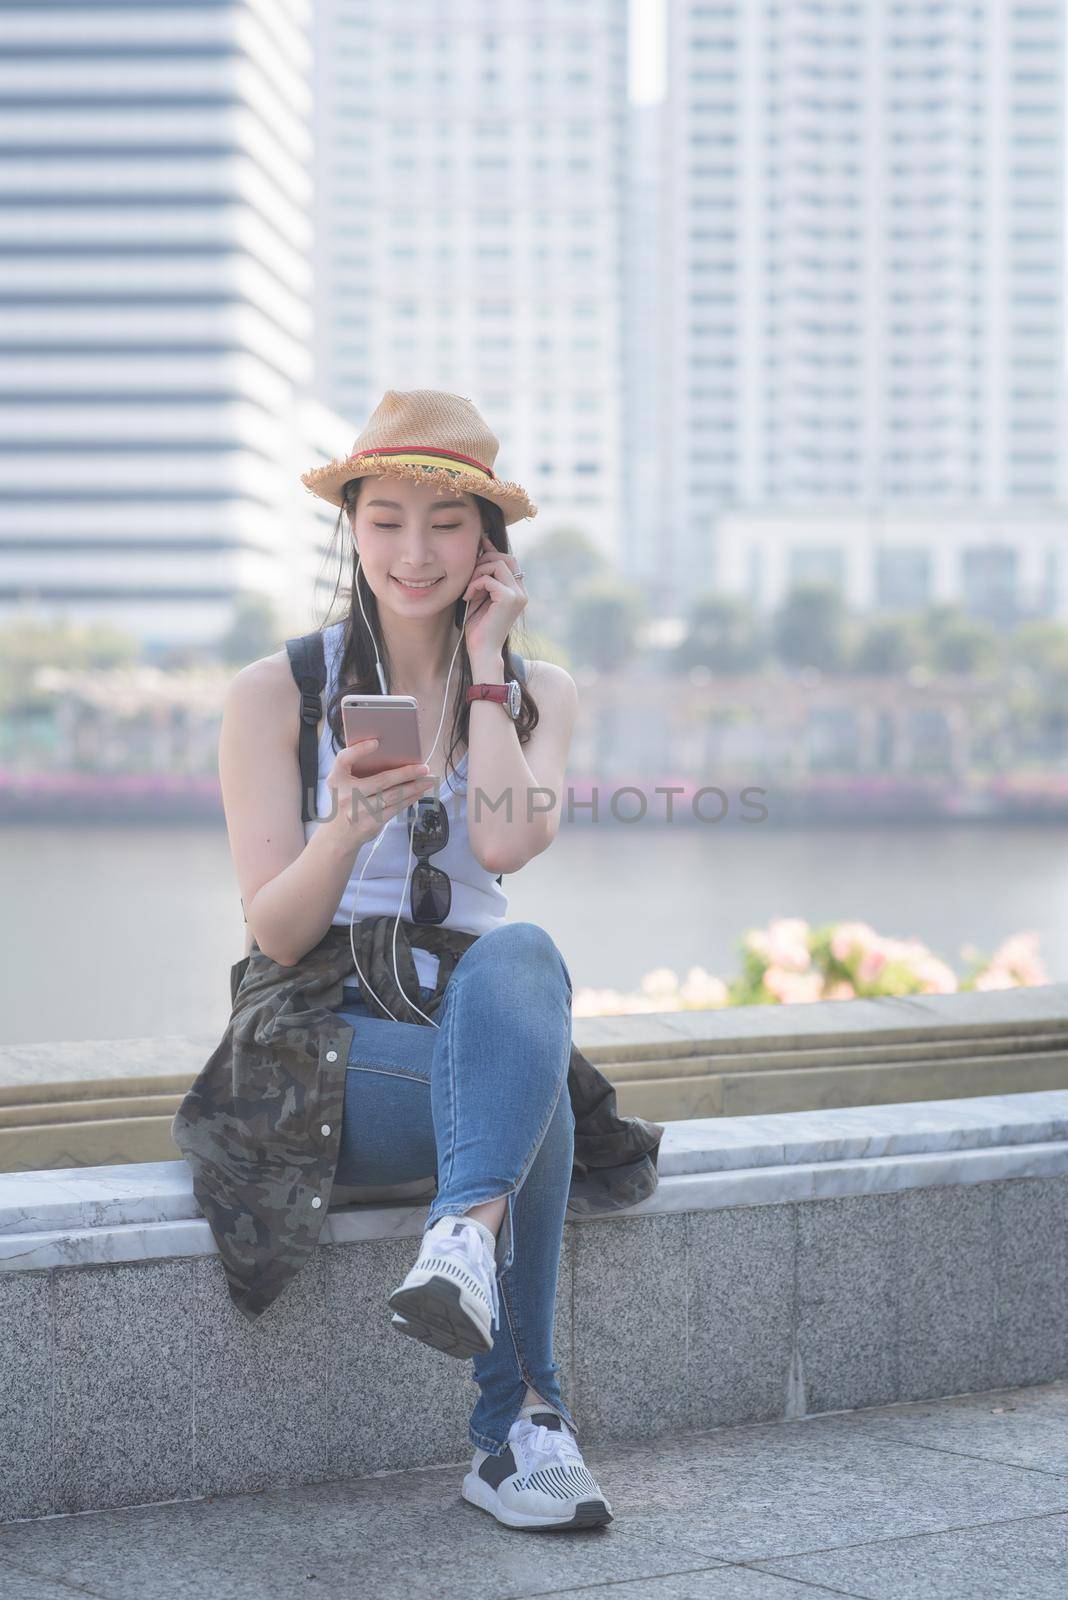 Beautiful asian solo tourist woman relaxing and enjoying listening the music on a smartphone in urban city downtown. by Nuamfolio